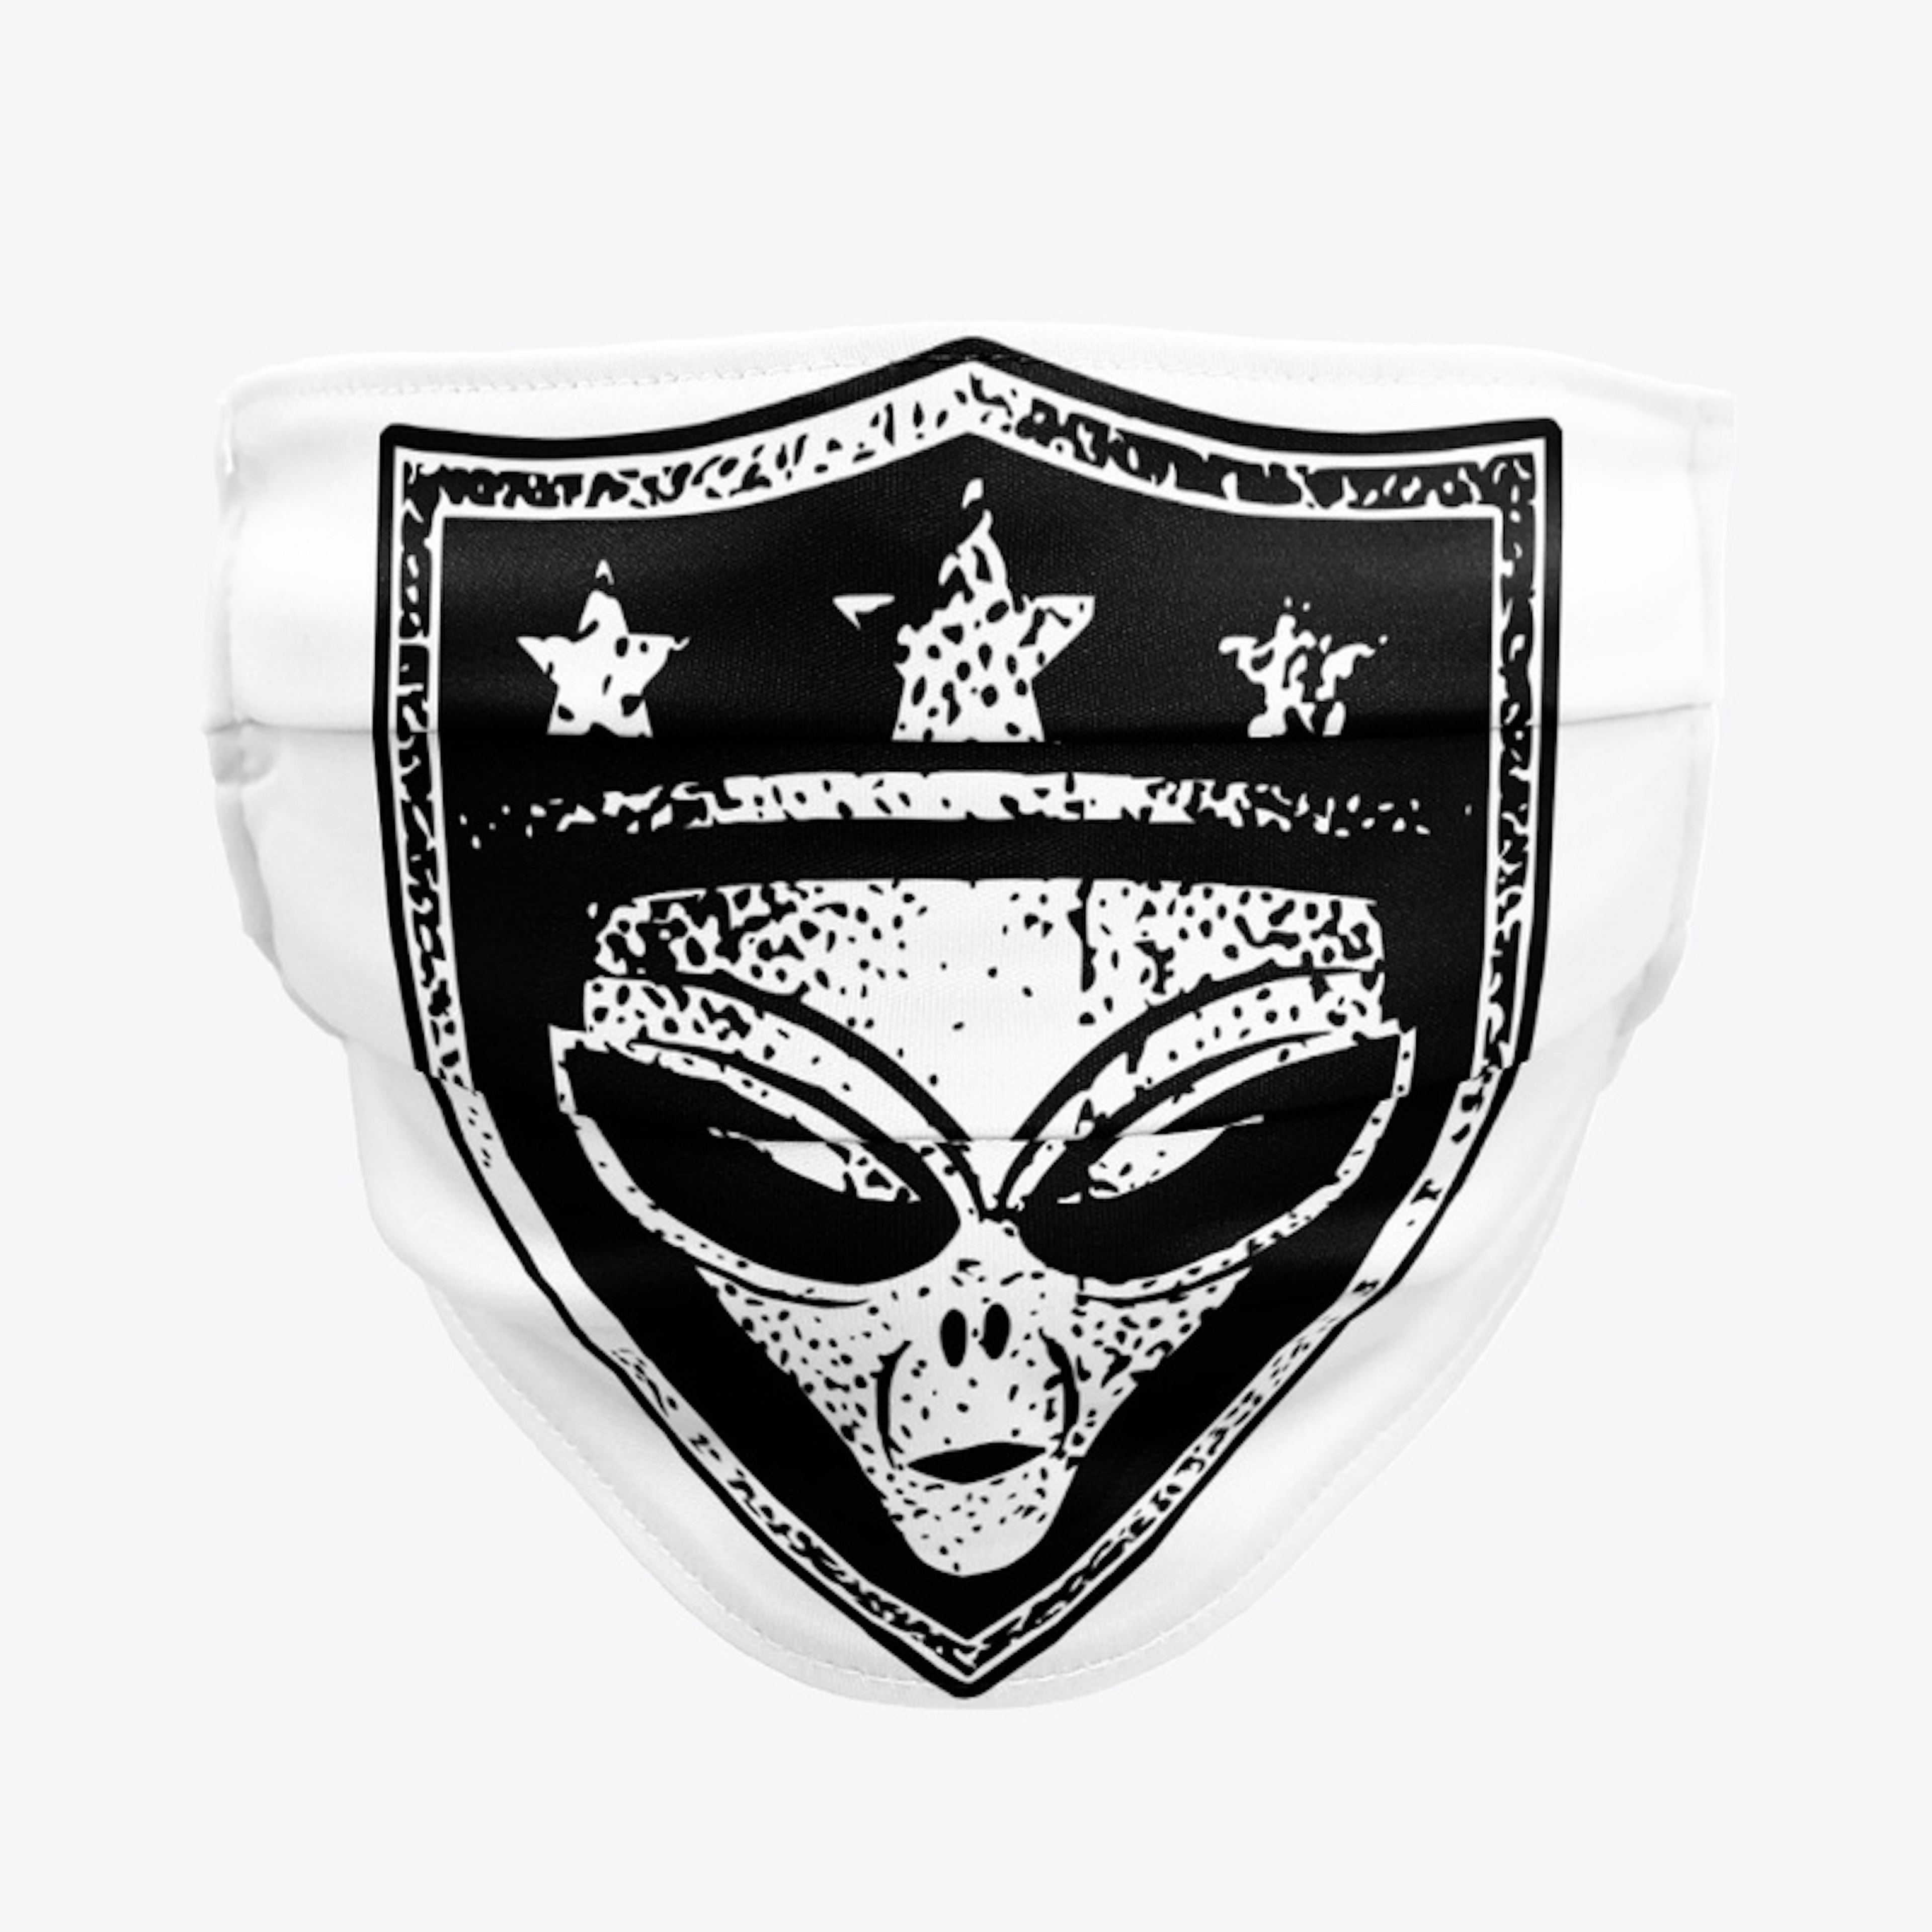 Will Black 'alien' cloth facemask 1